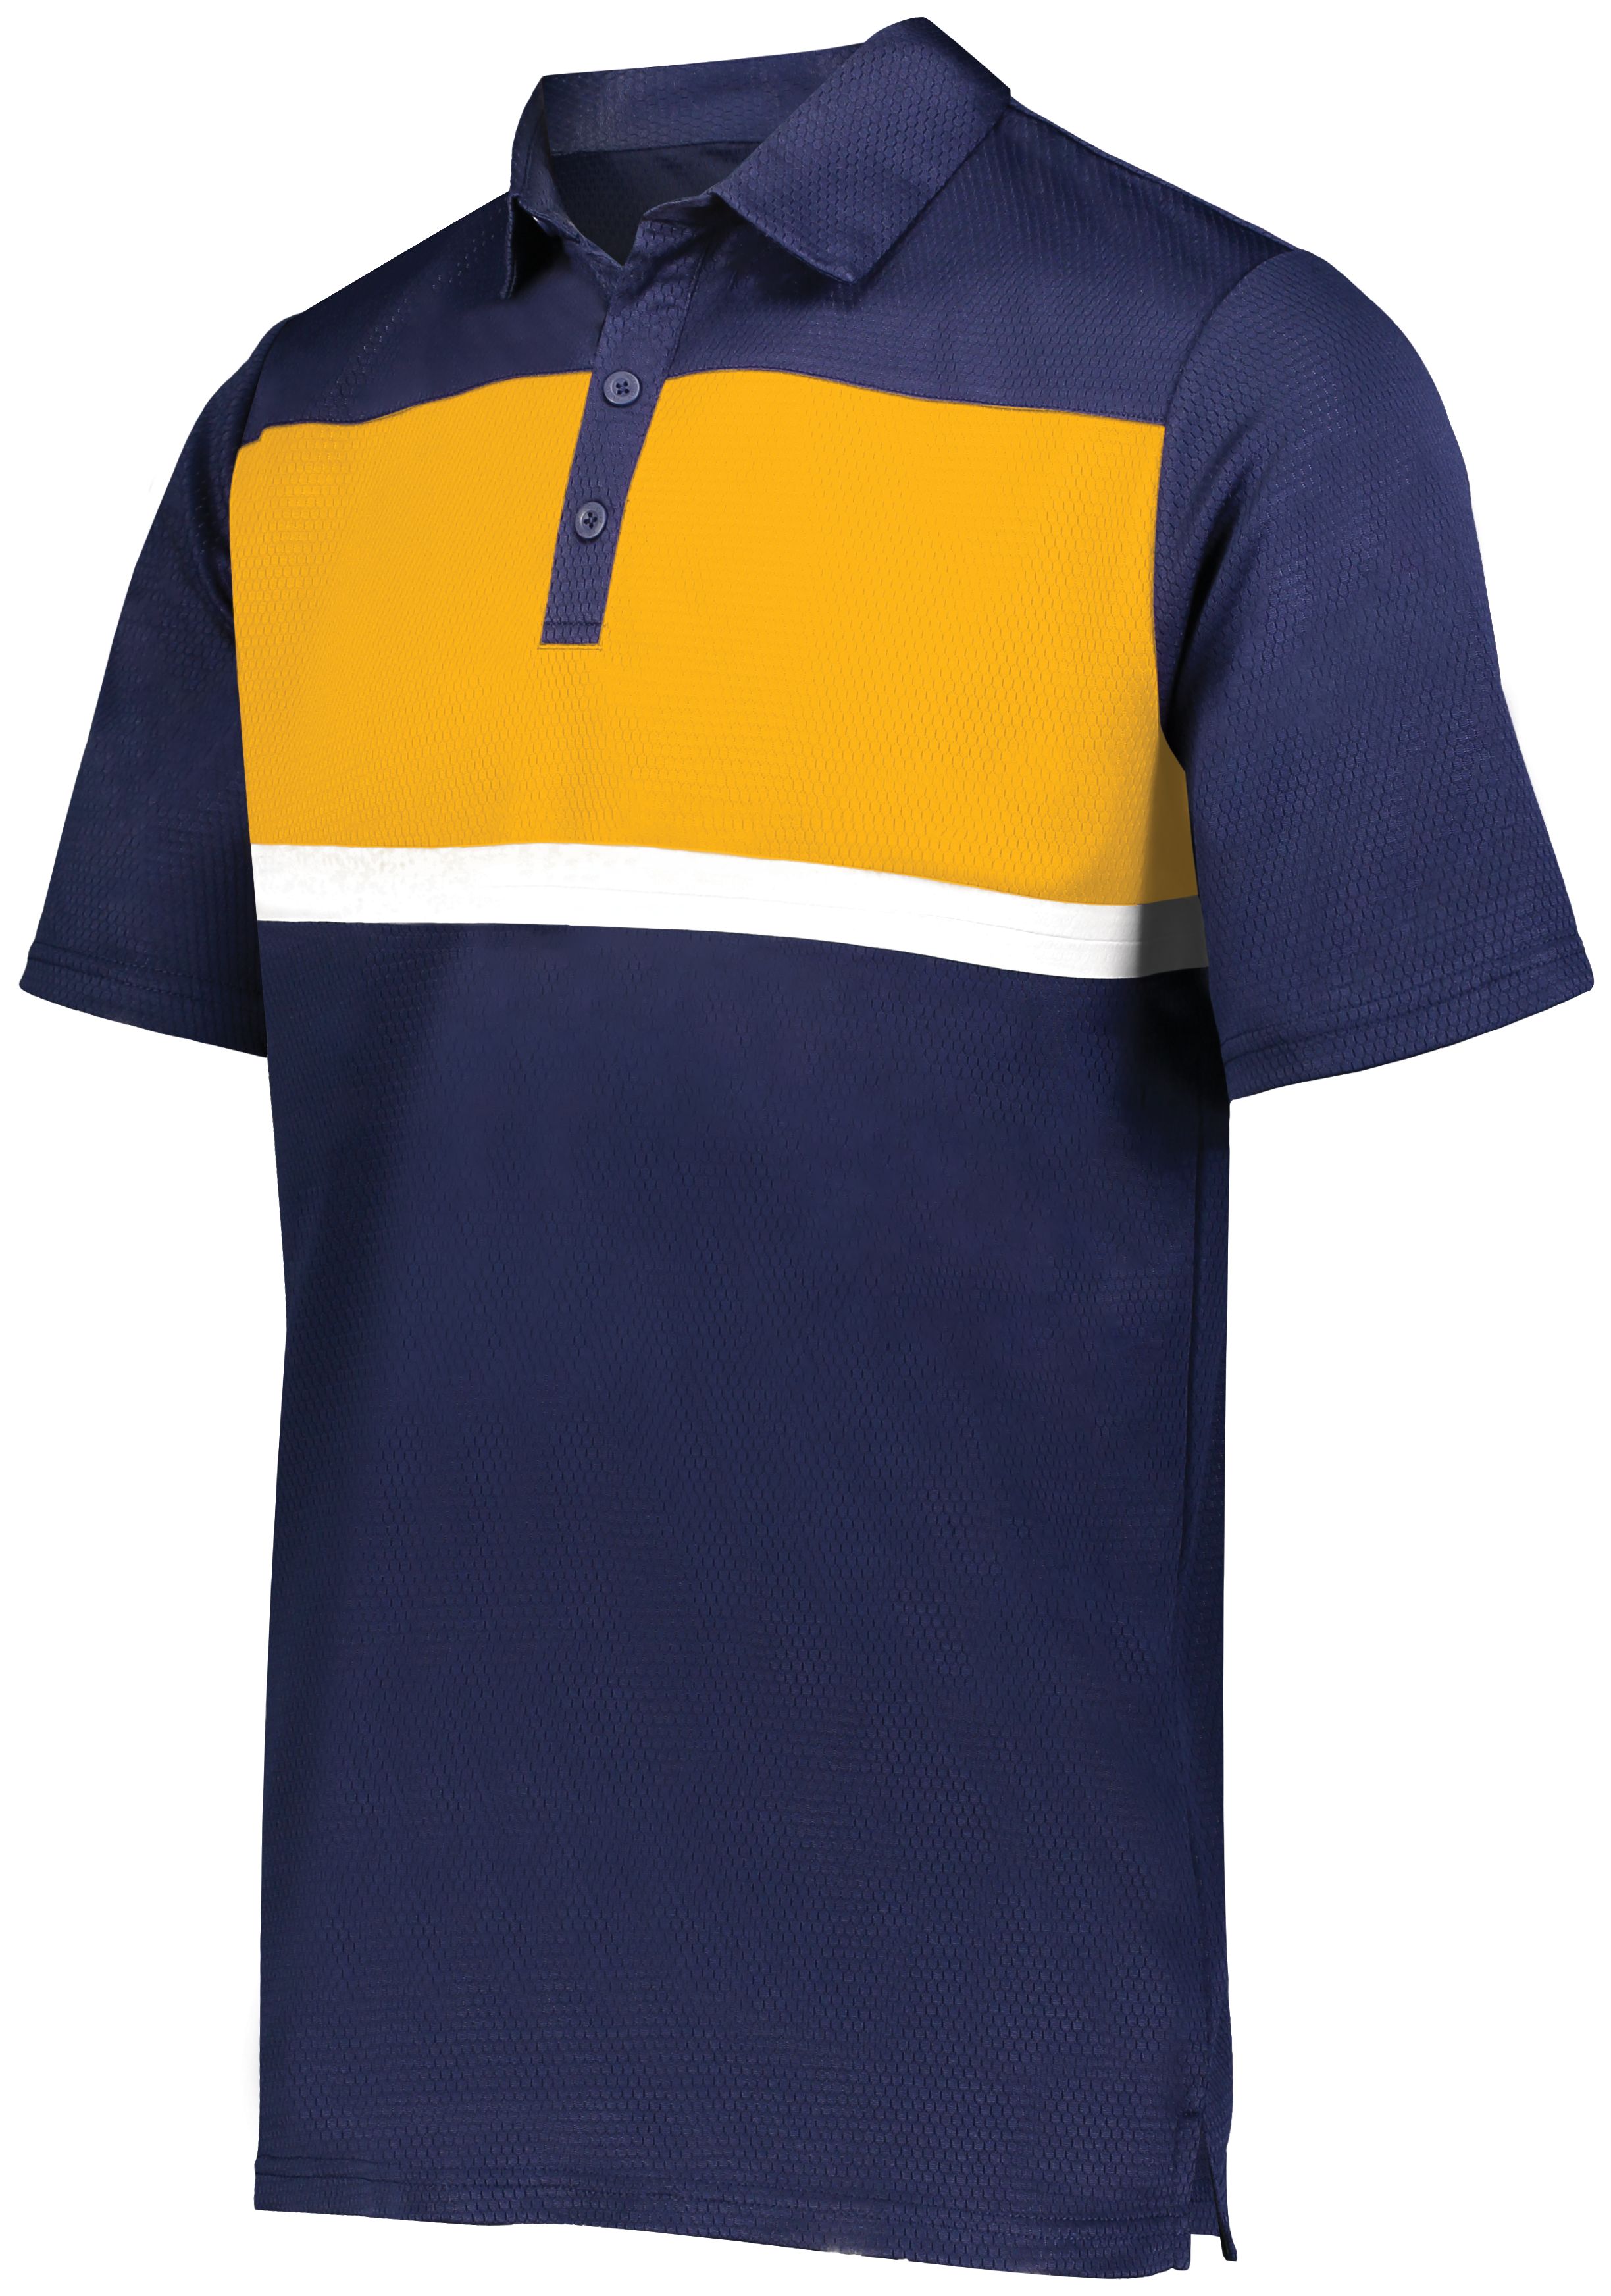 click to view Navy/Gold